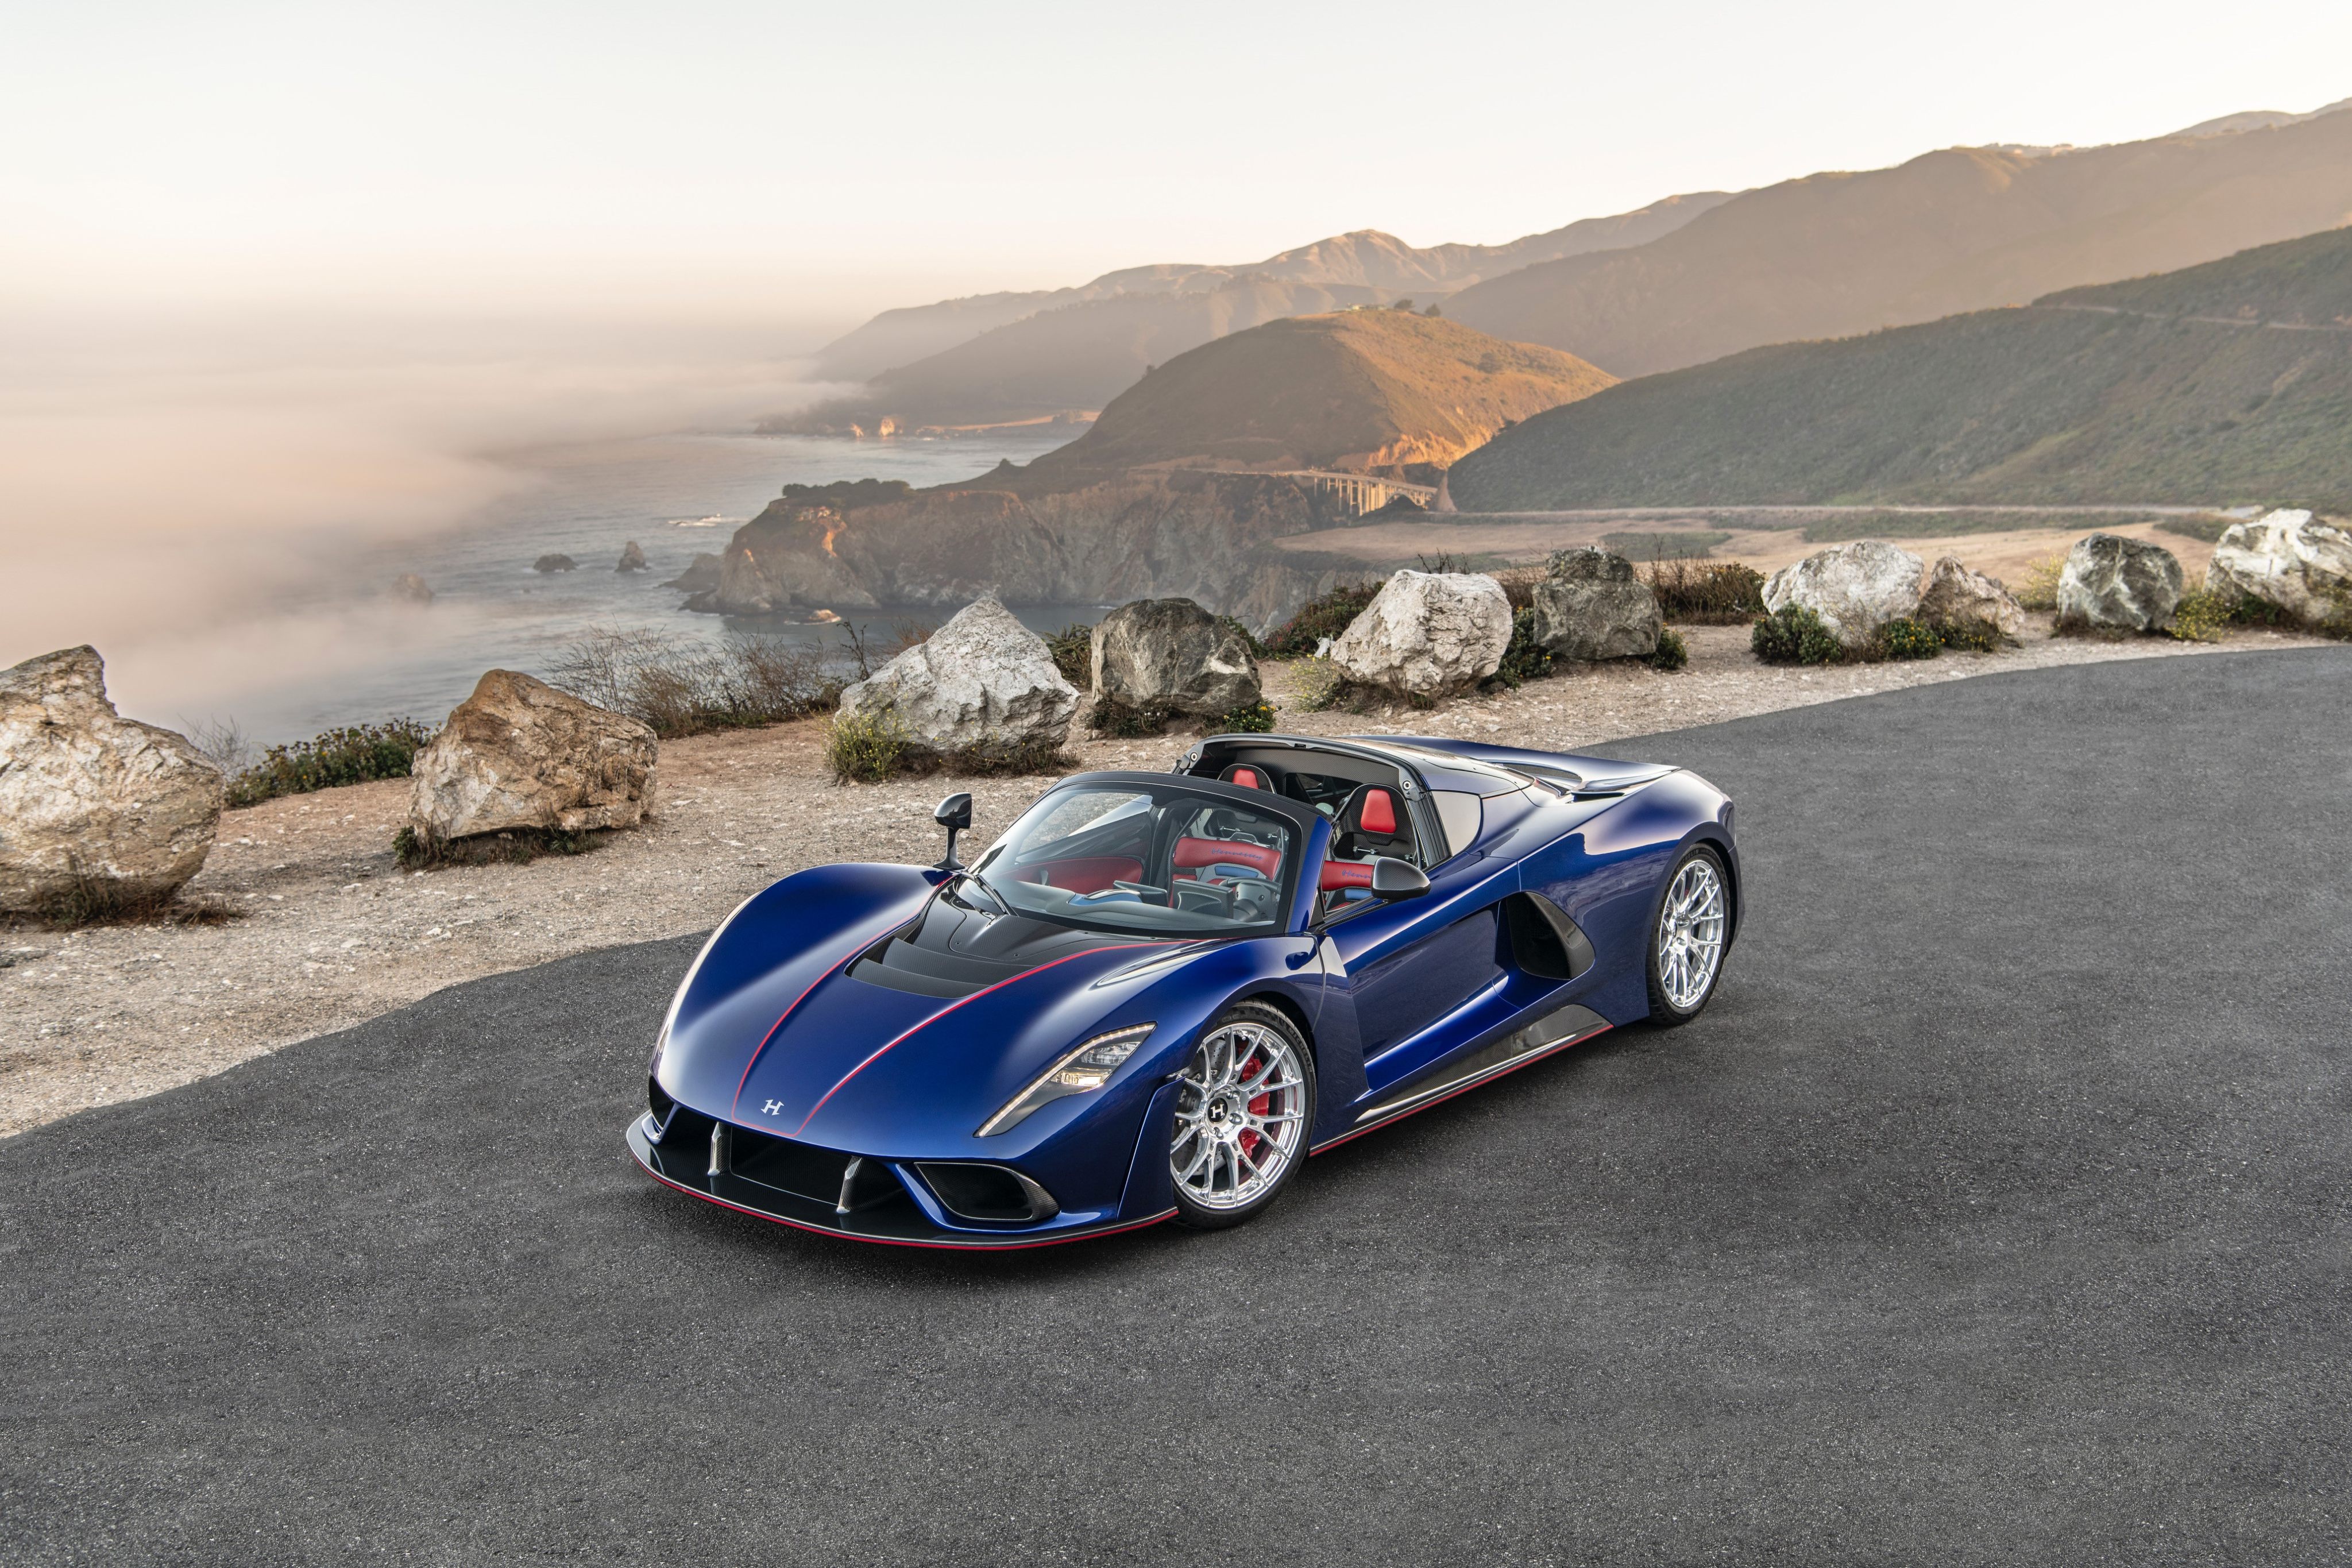 The Hennessey Venom F5 Roadster supercar in Hyper Blue. Photos: Handout